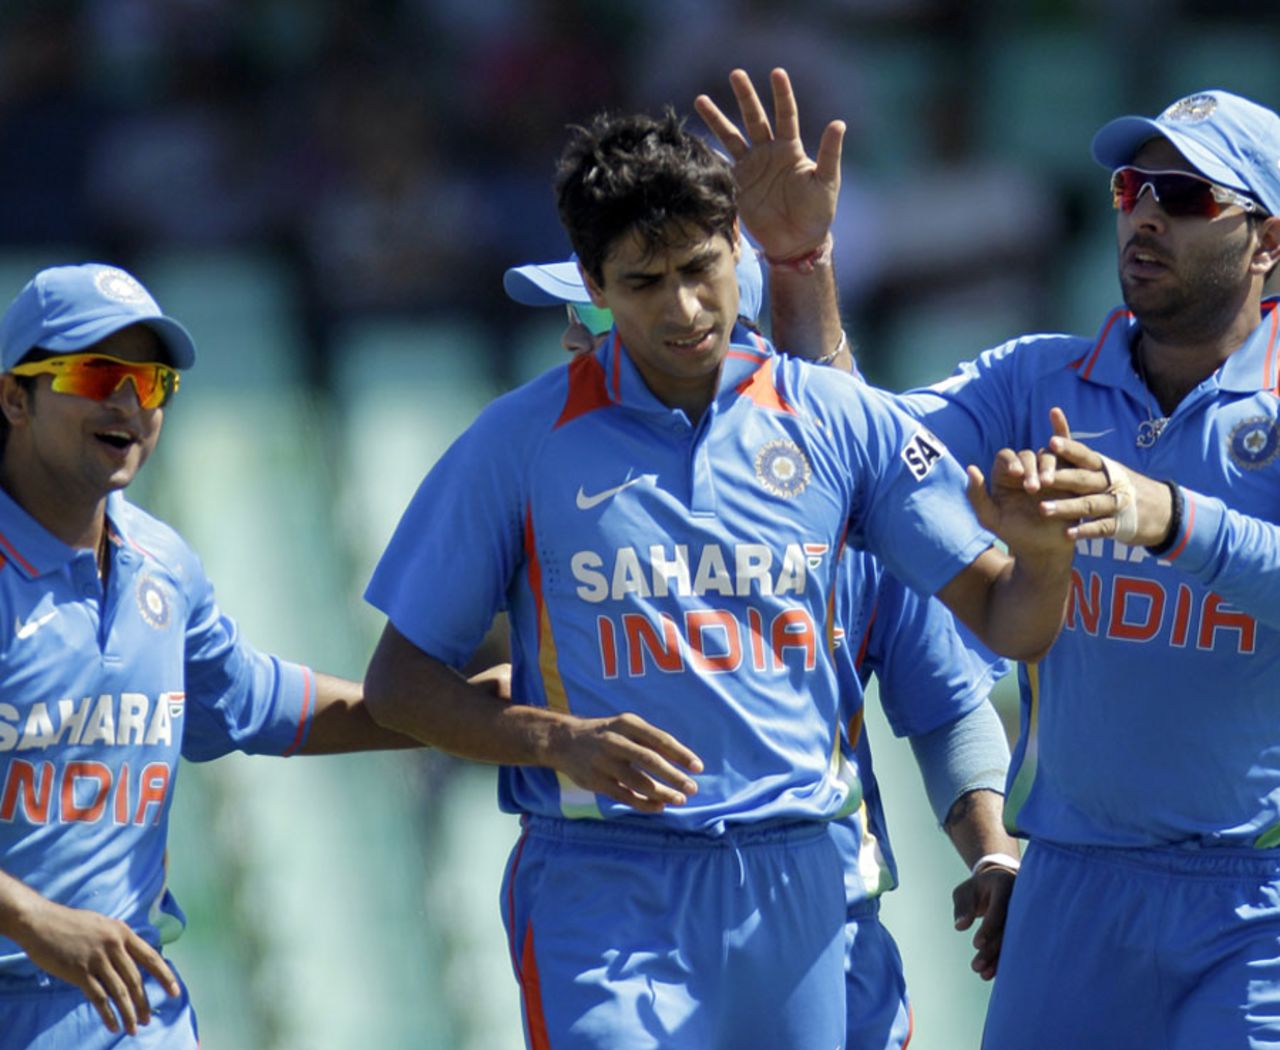 Ashish Nehra is congratulated on dismissing Graeme Smith, South Africa v India, 1st ODI, Durban, January 12, 2011